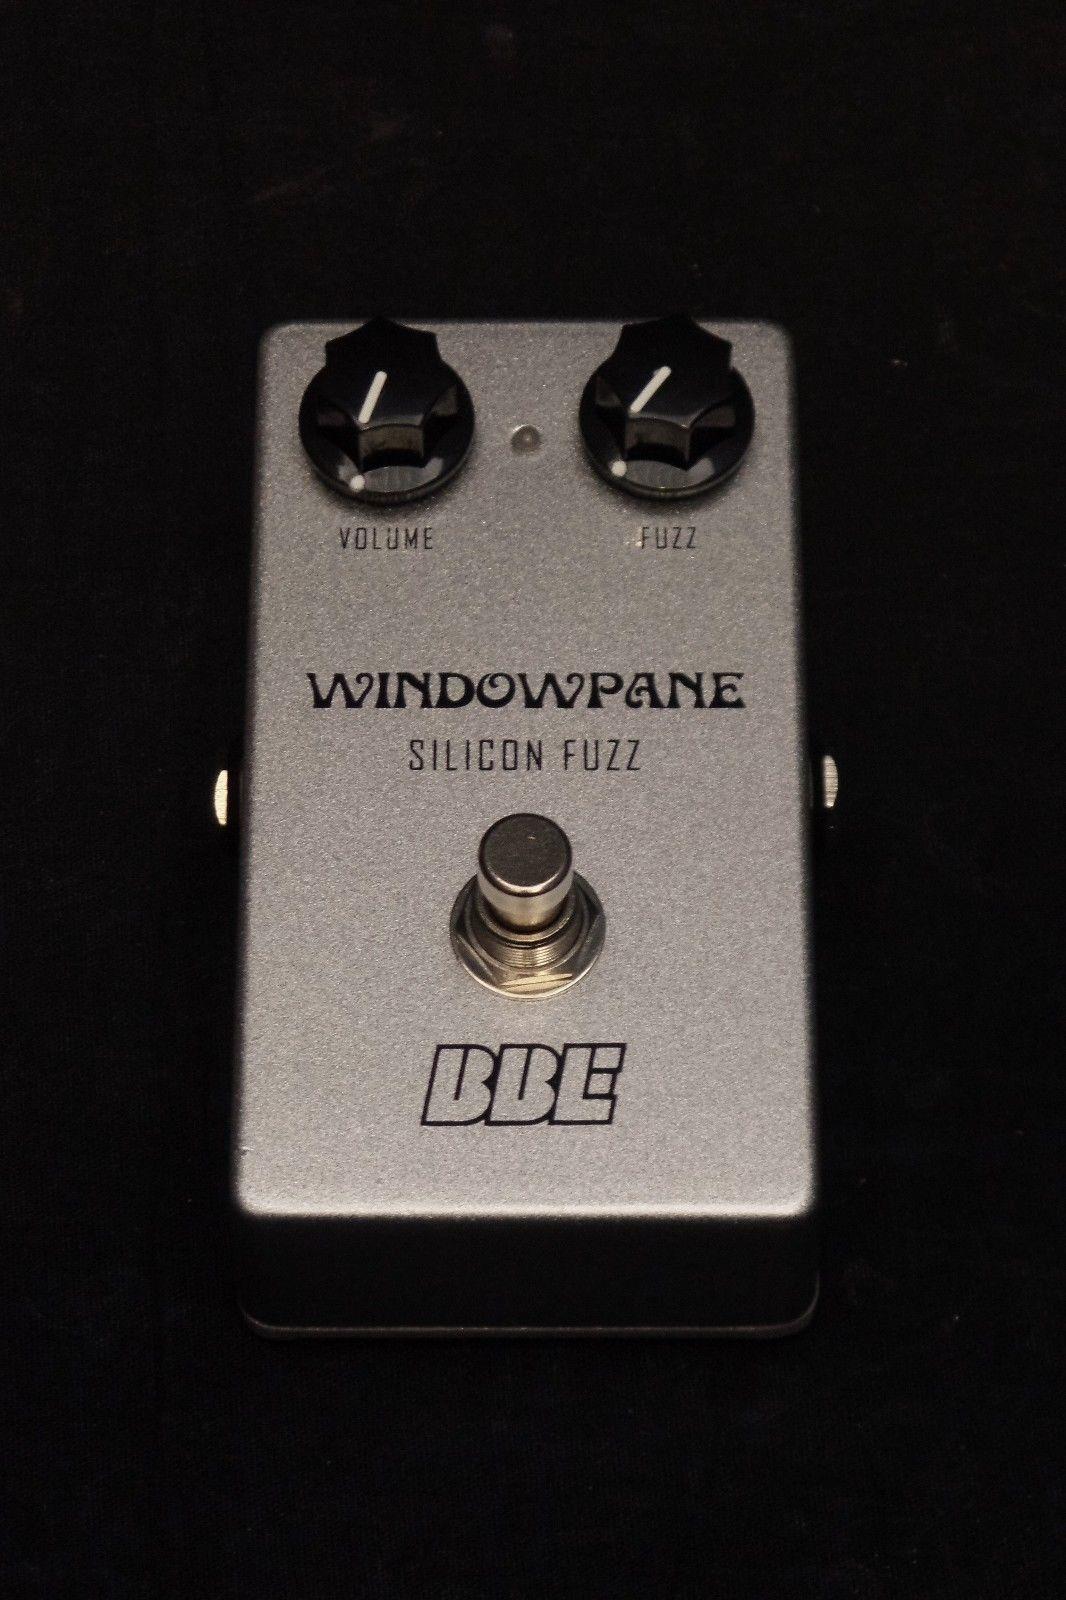 BBE Windowpane Silicon Fuzz Effects FX Pedal for Electric Guitar